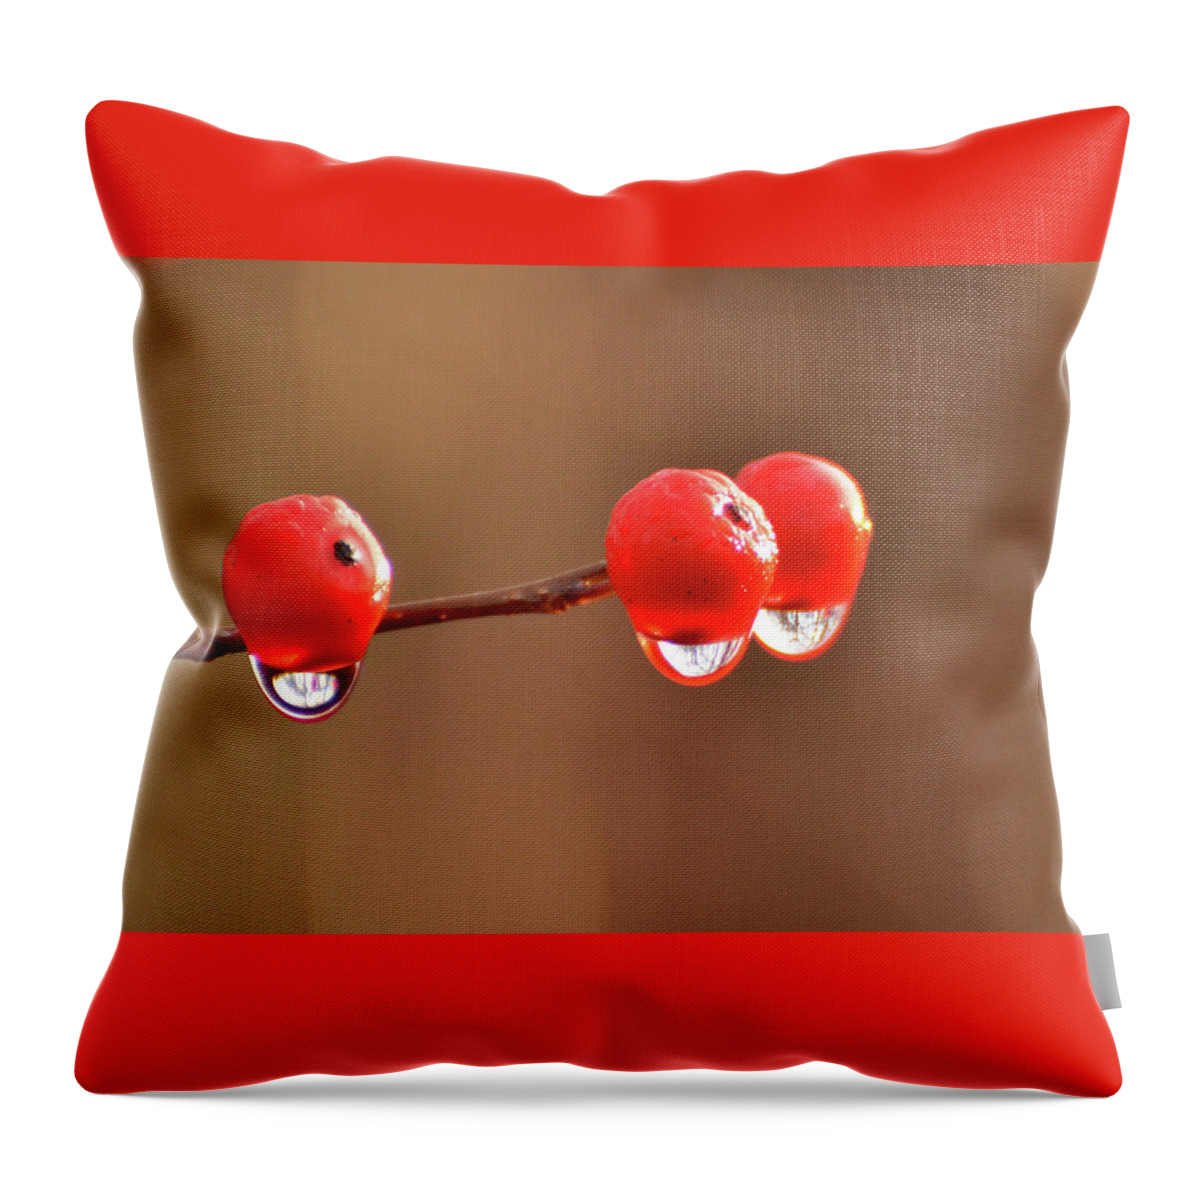 Droplets Throw Pillow featuring the photograph Droplets by Nancy Landry